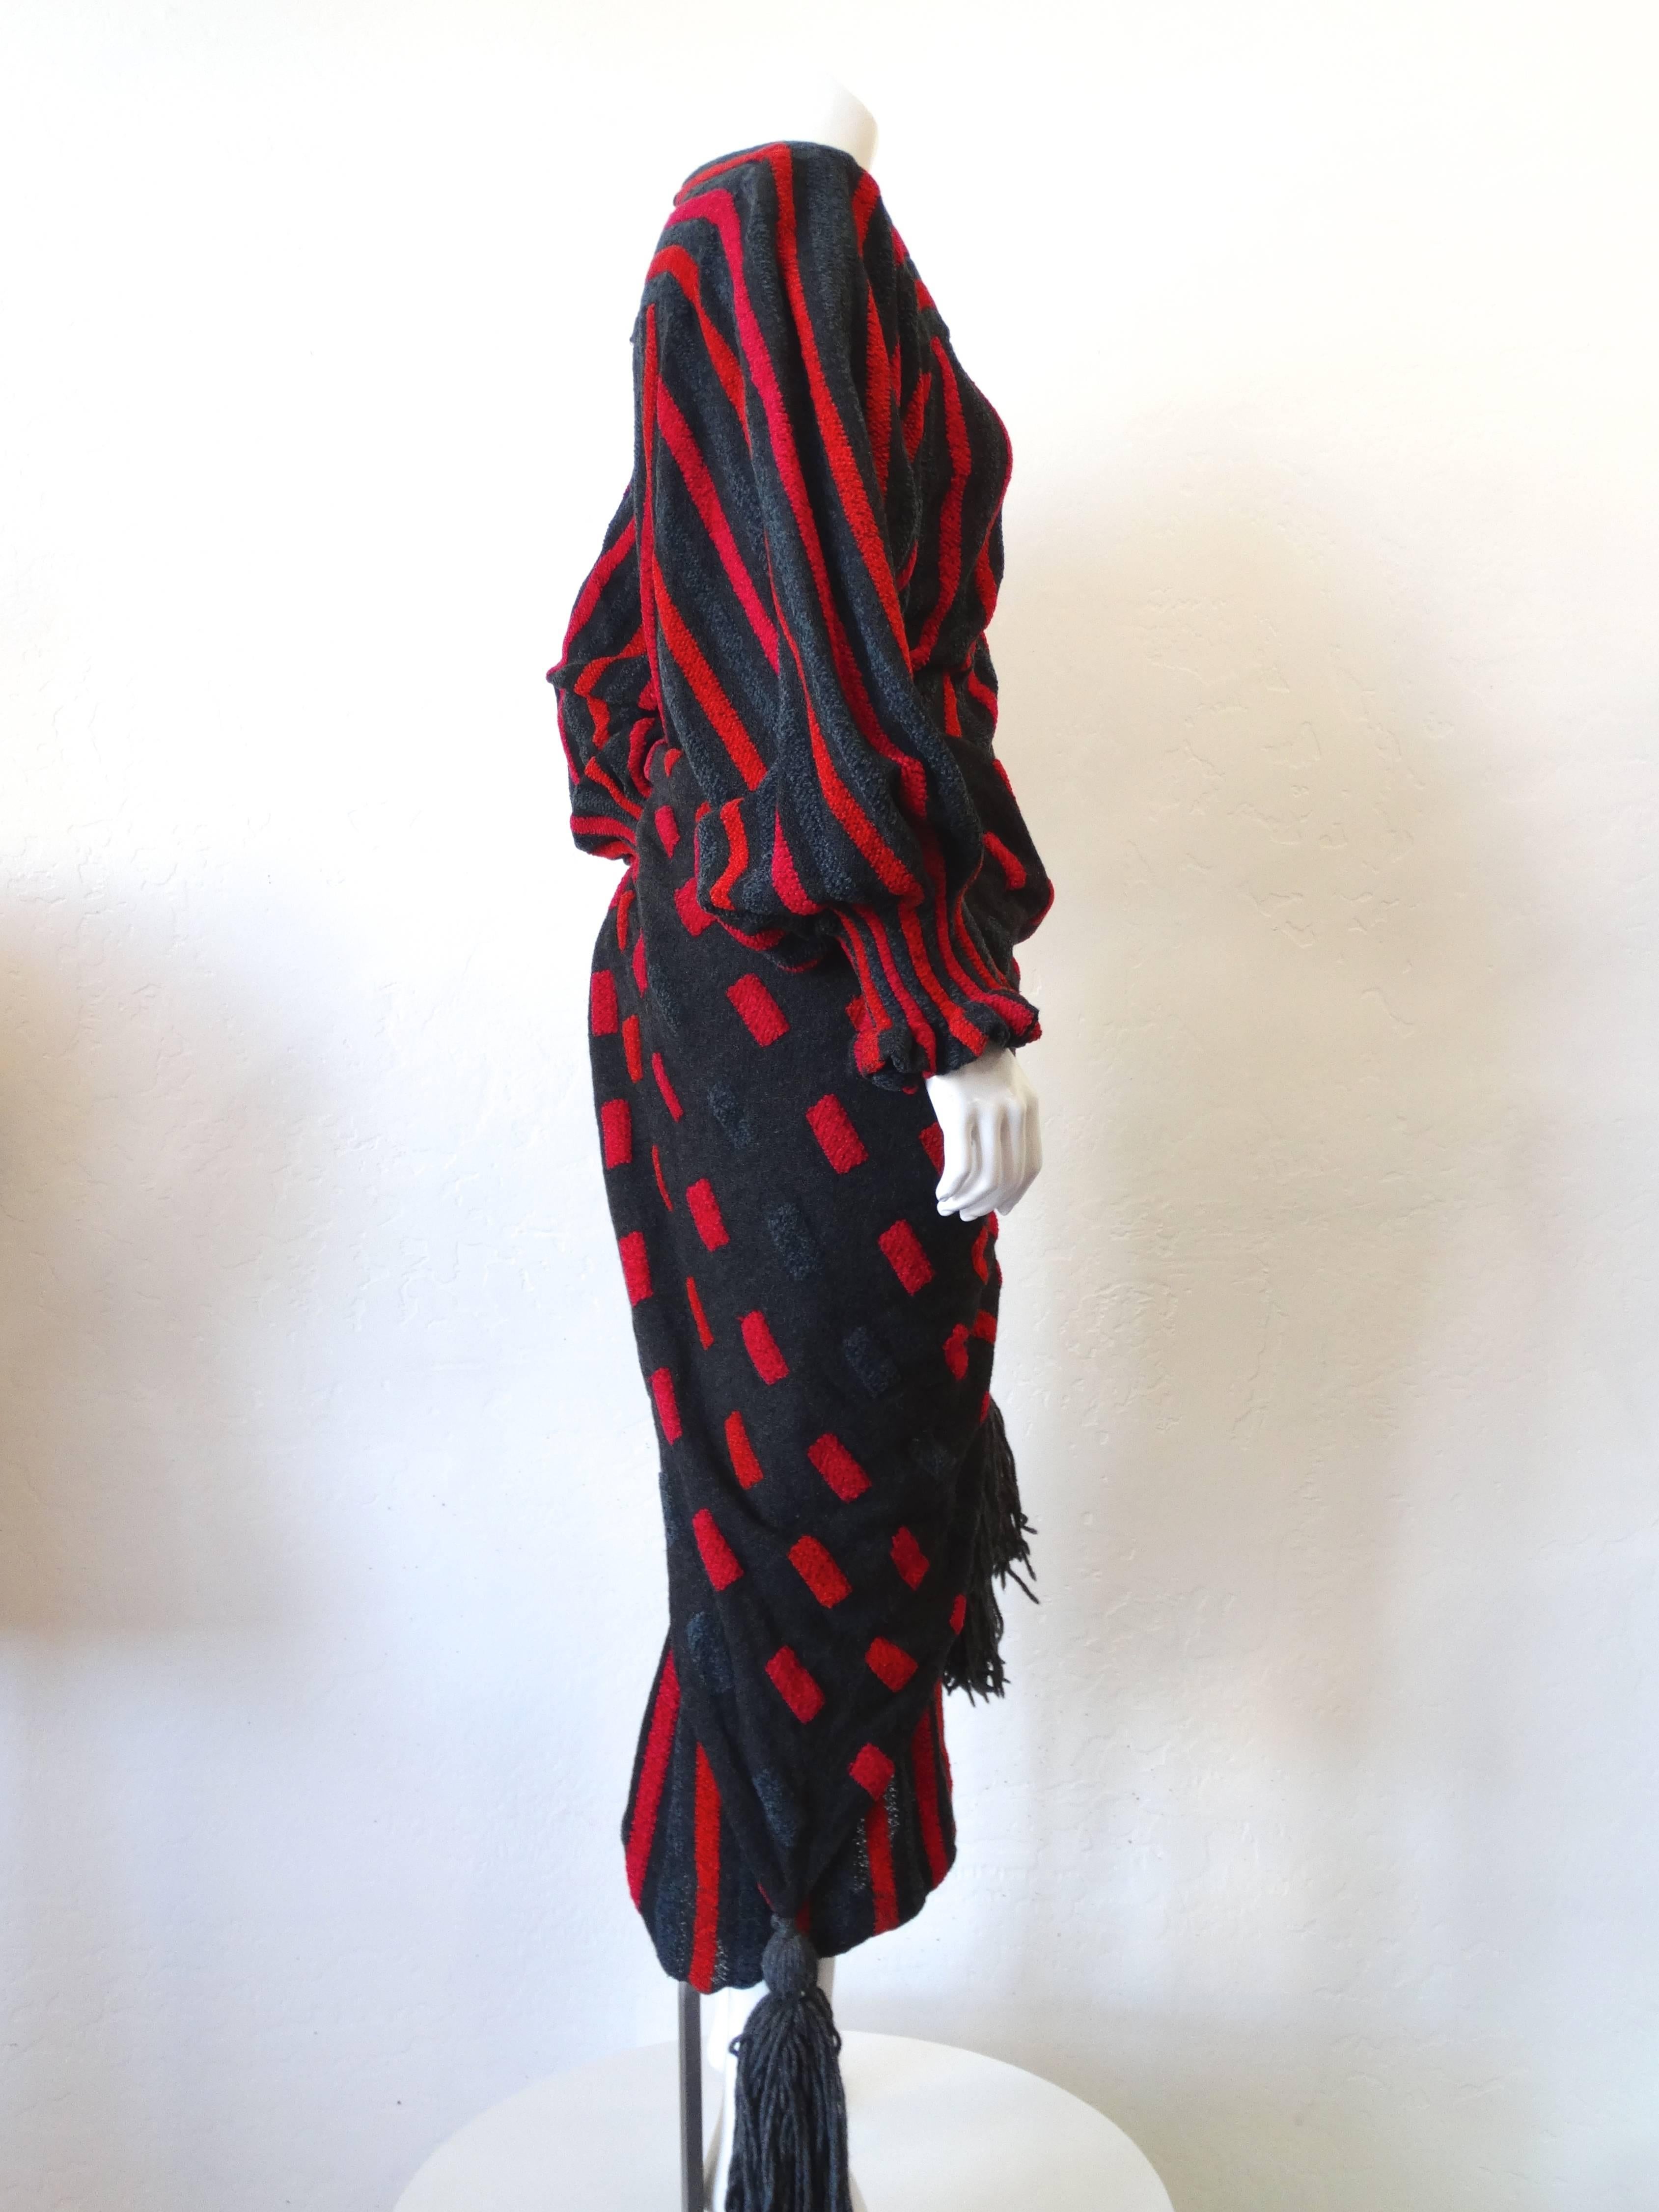 Amazing 1980s dress from Japanese-Australian designer Akira Isogawa. Sculptural balloon sleeves with elasticized cuffs. Cinches in at the waistline with matching shawl-like belt, with matching grey yarn tassels on the ends. Velour like, soft knit